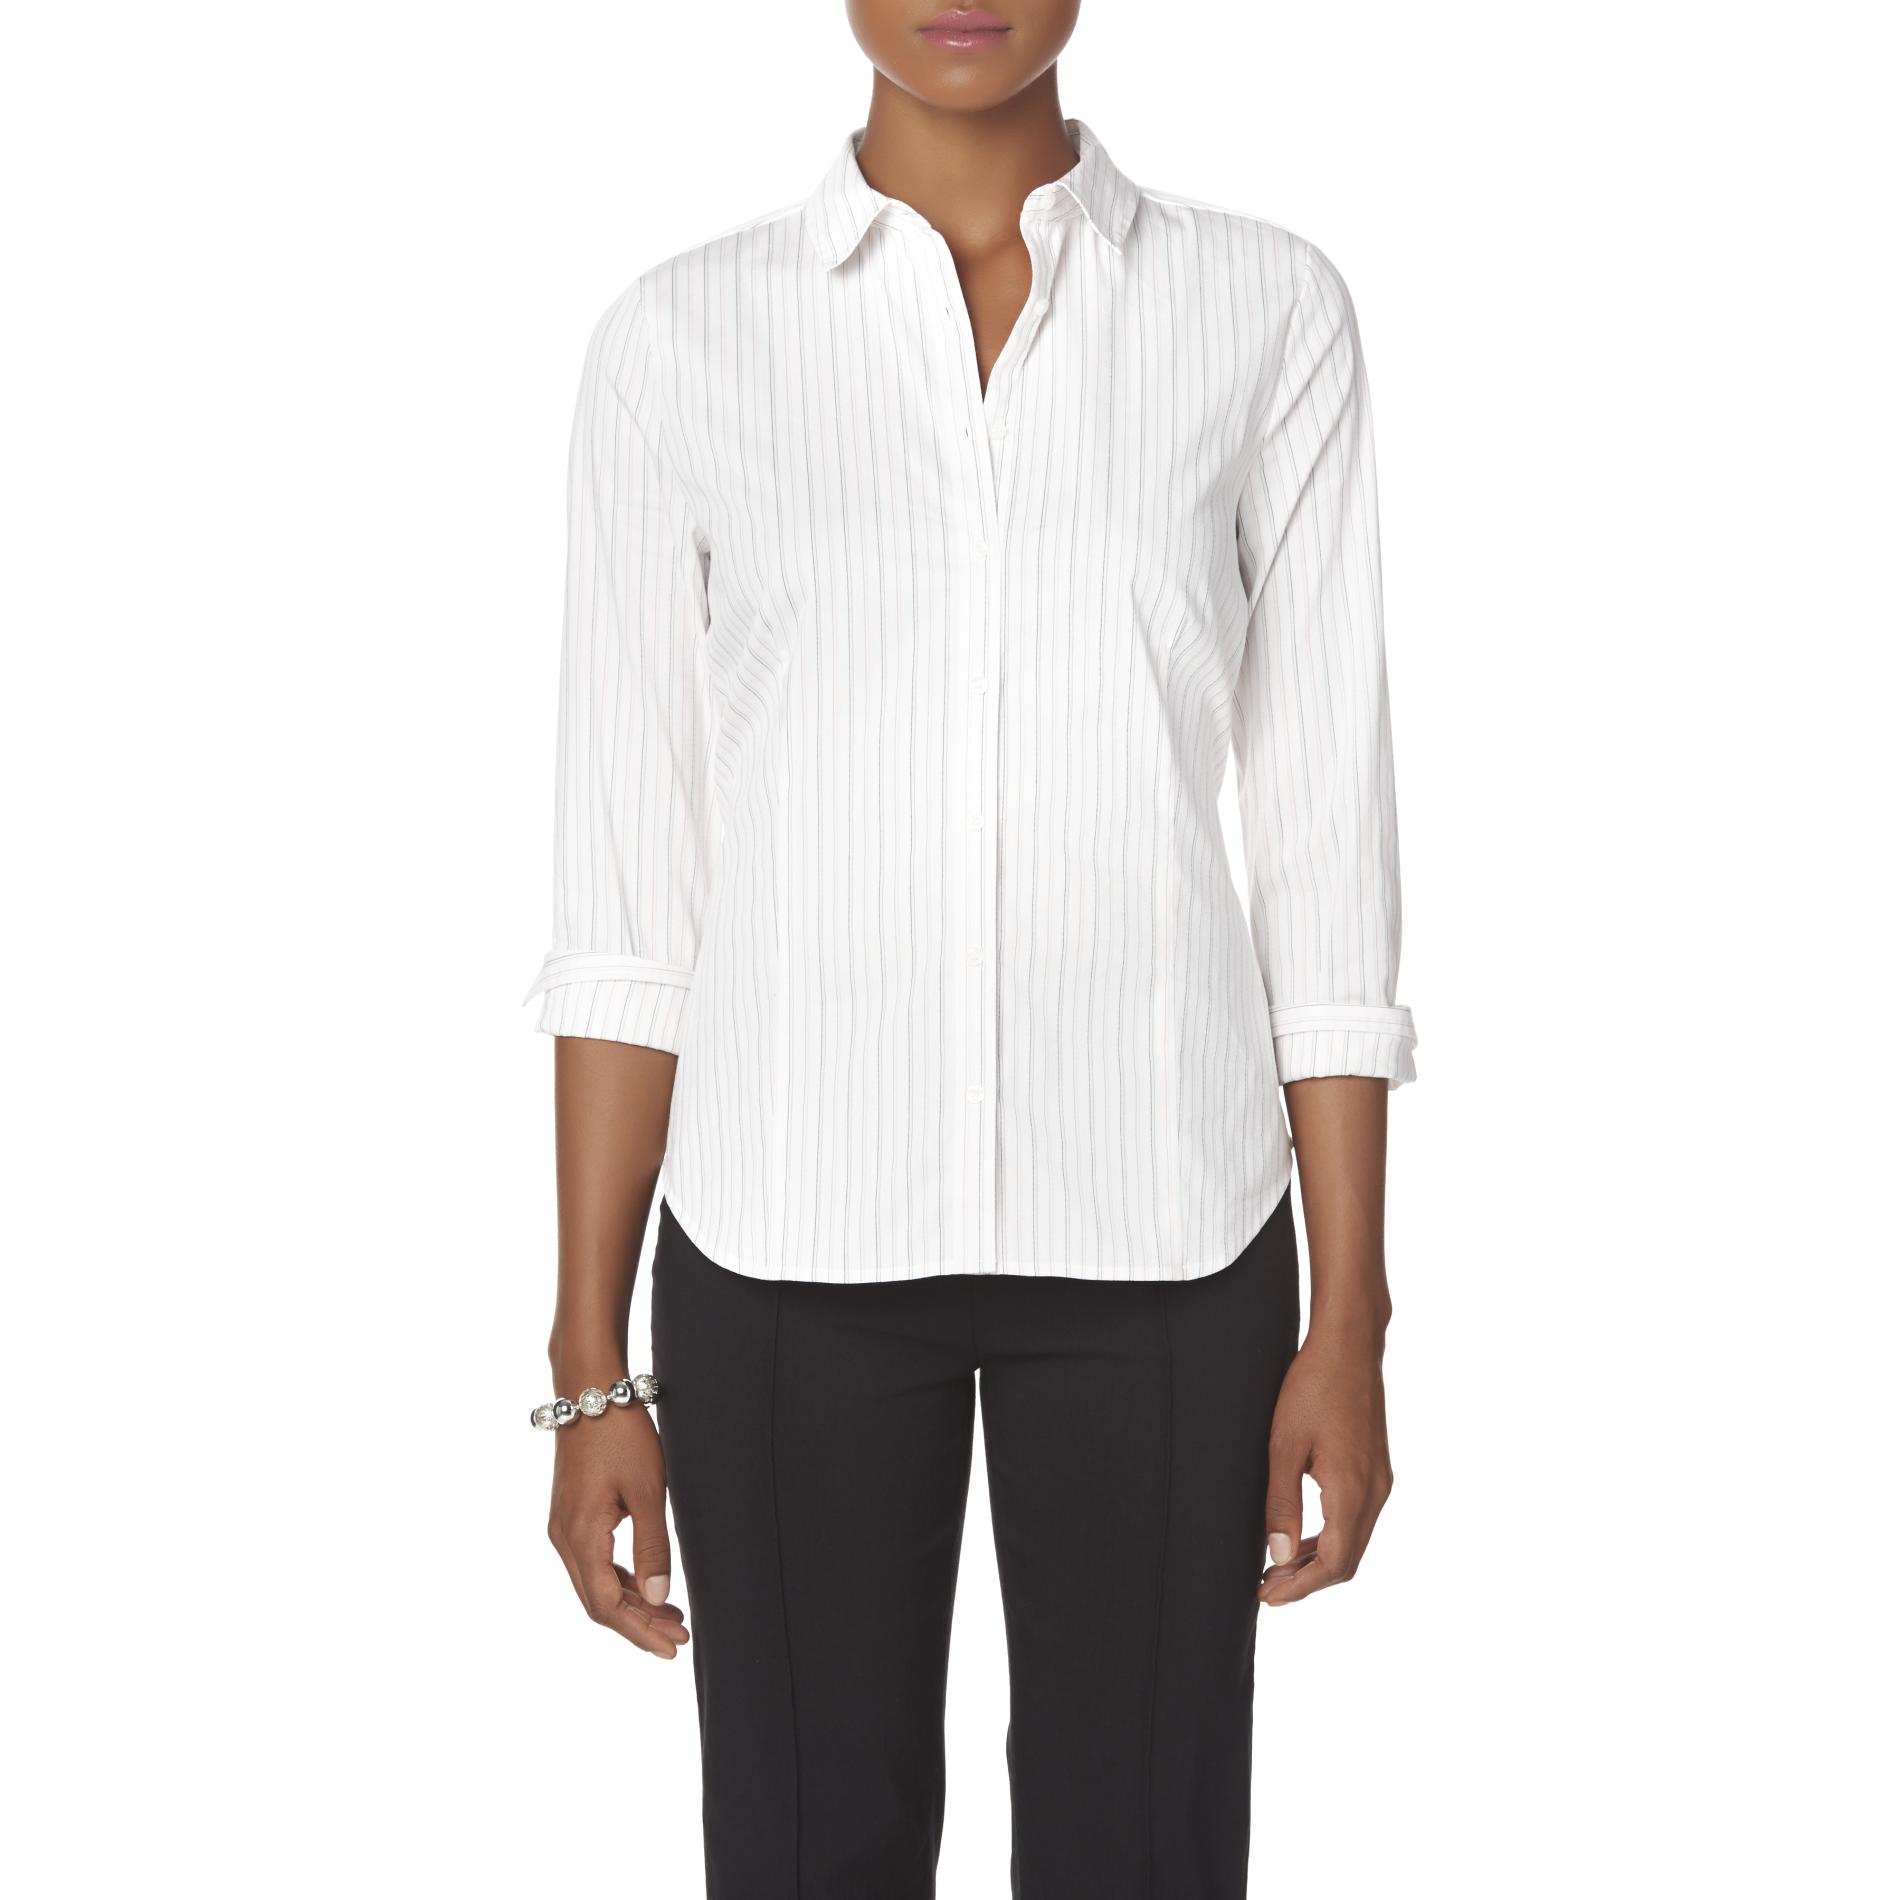 Covington Women's Fitted Blouse - Striped